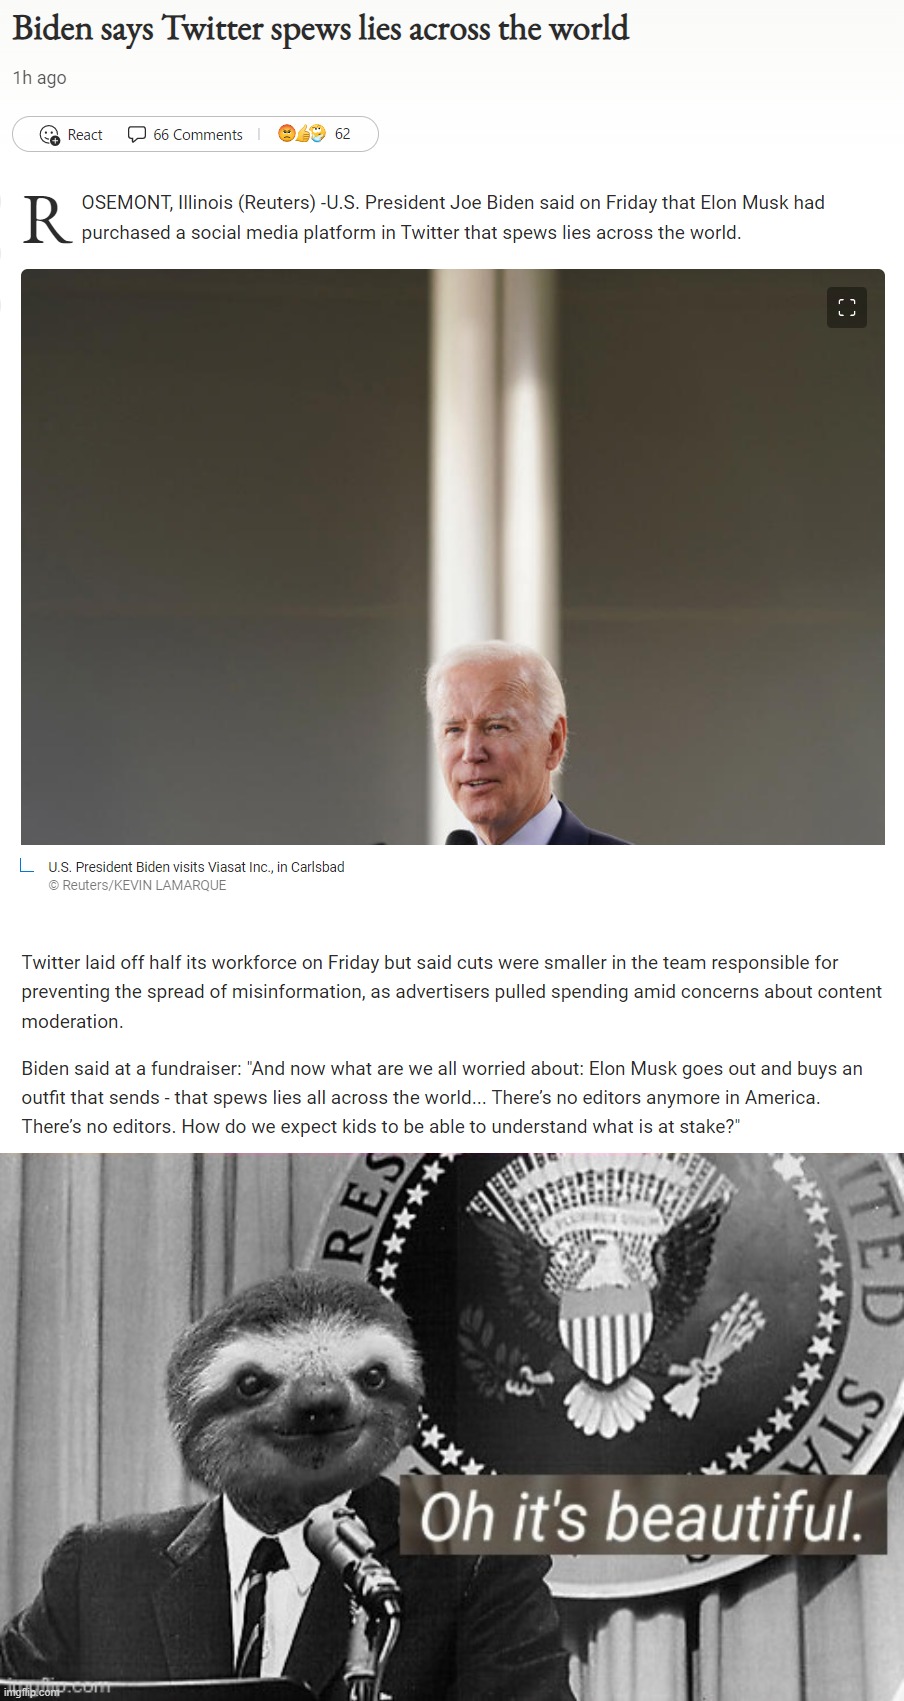 He did it. He actually said it. Yes, more of this please. | image tagged in biden says twitter spews lies,president sloth oh it s beautiful | made w/ Imgflip meme maker